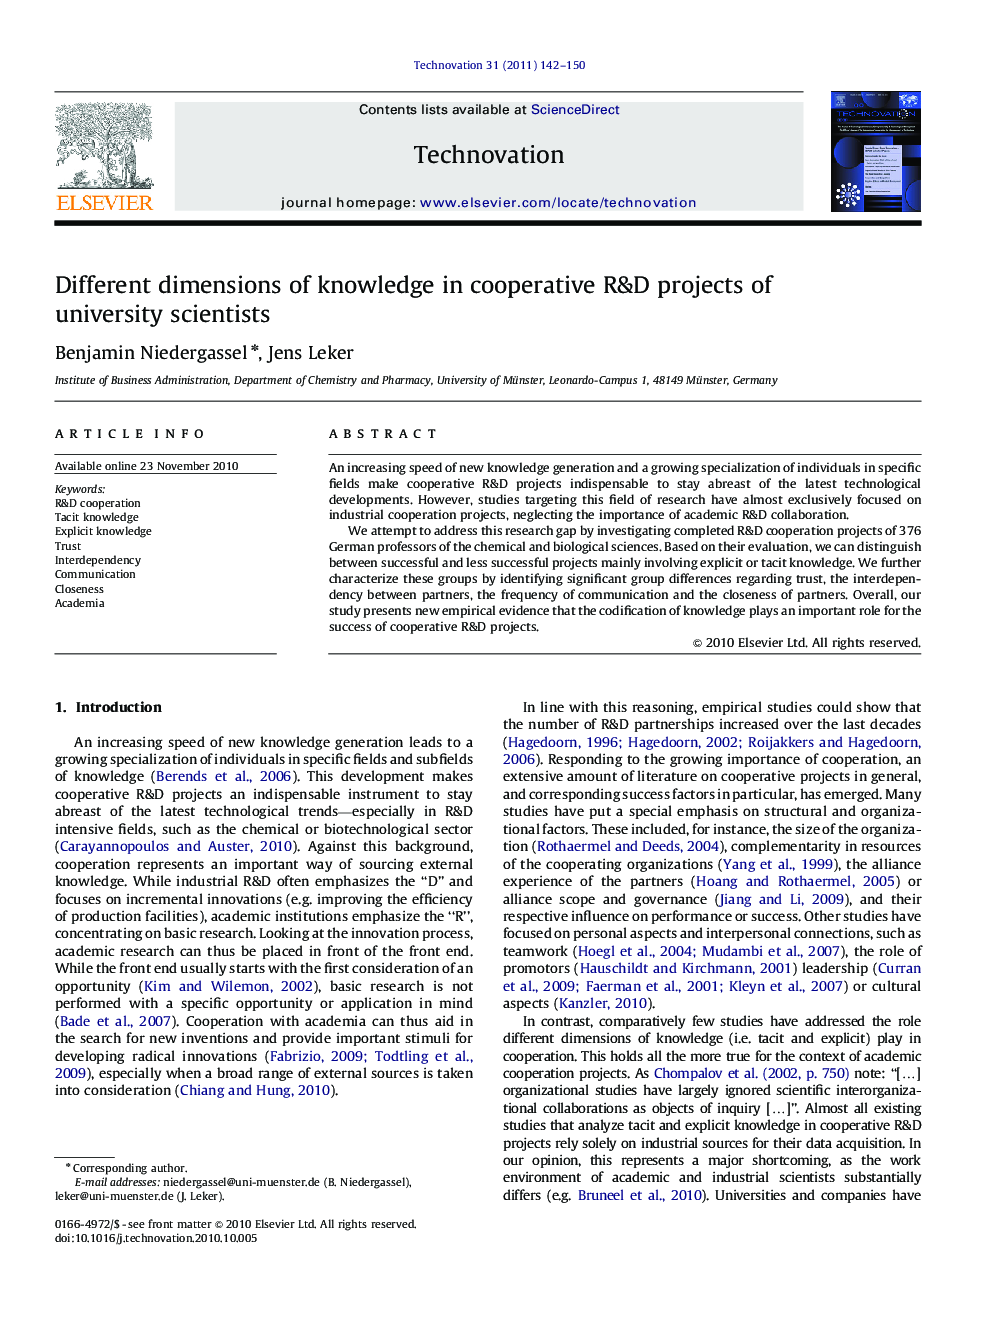 Different dimensions of knowledge in cooperative R&D projects of university scientists